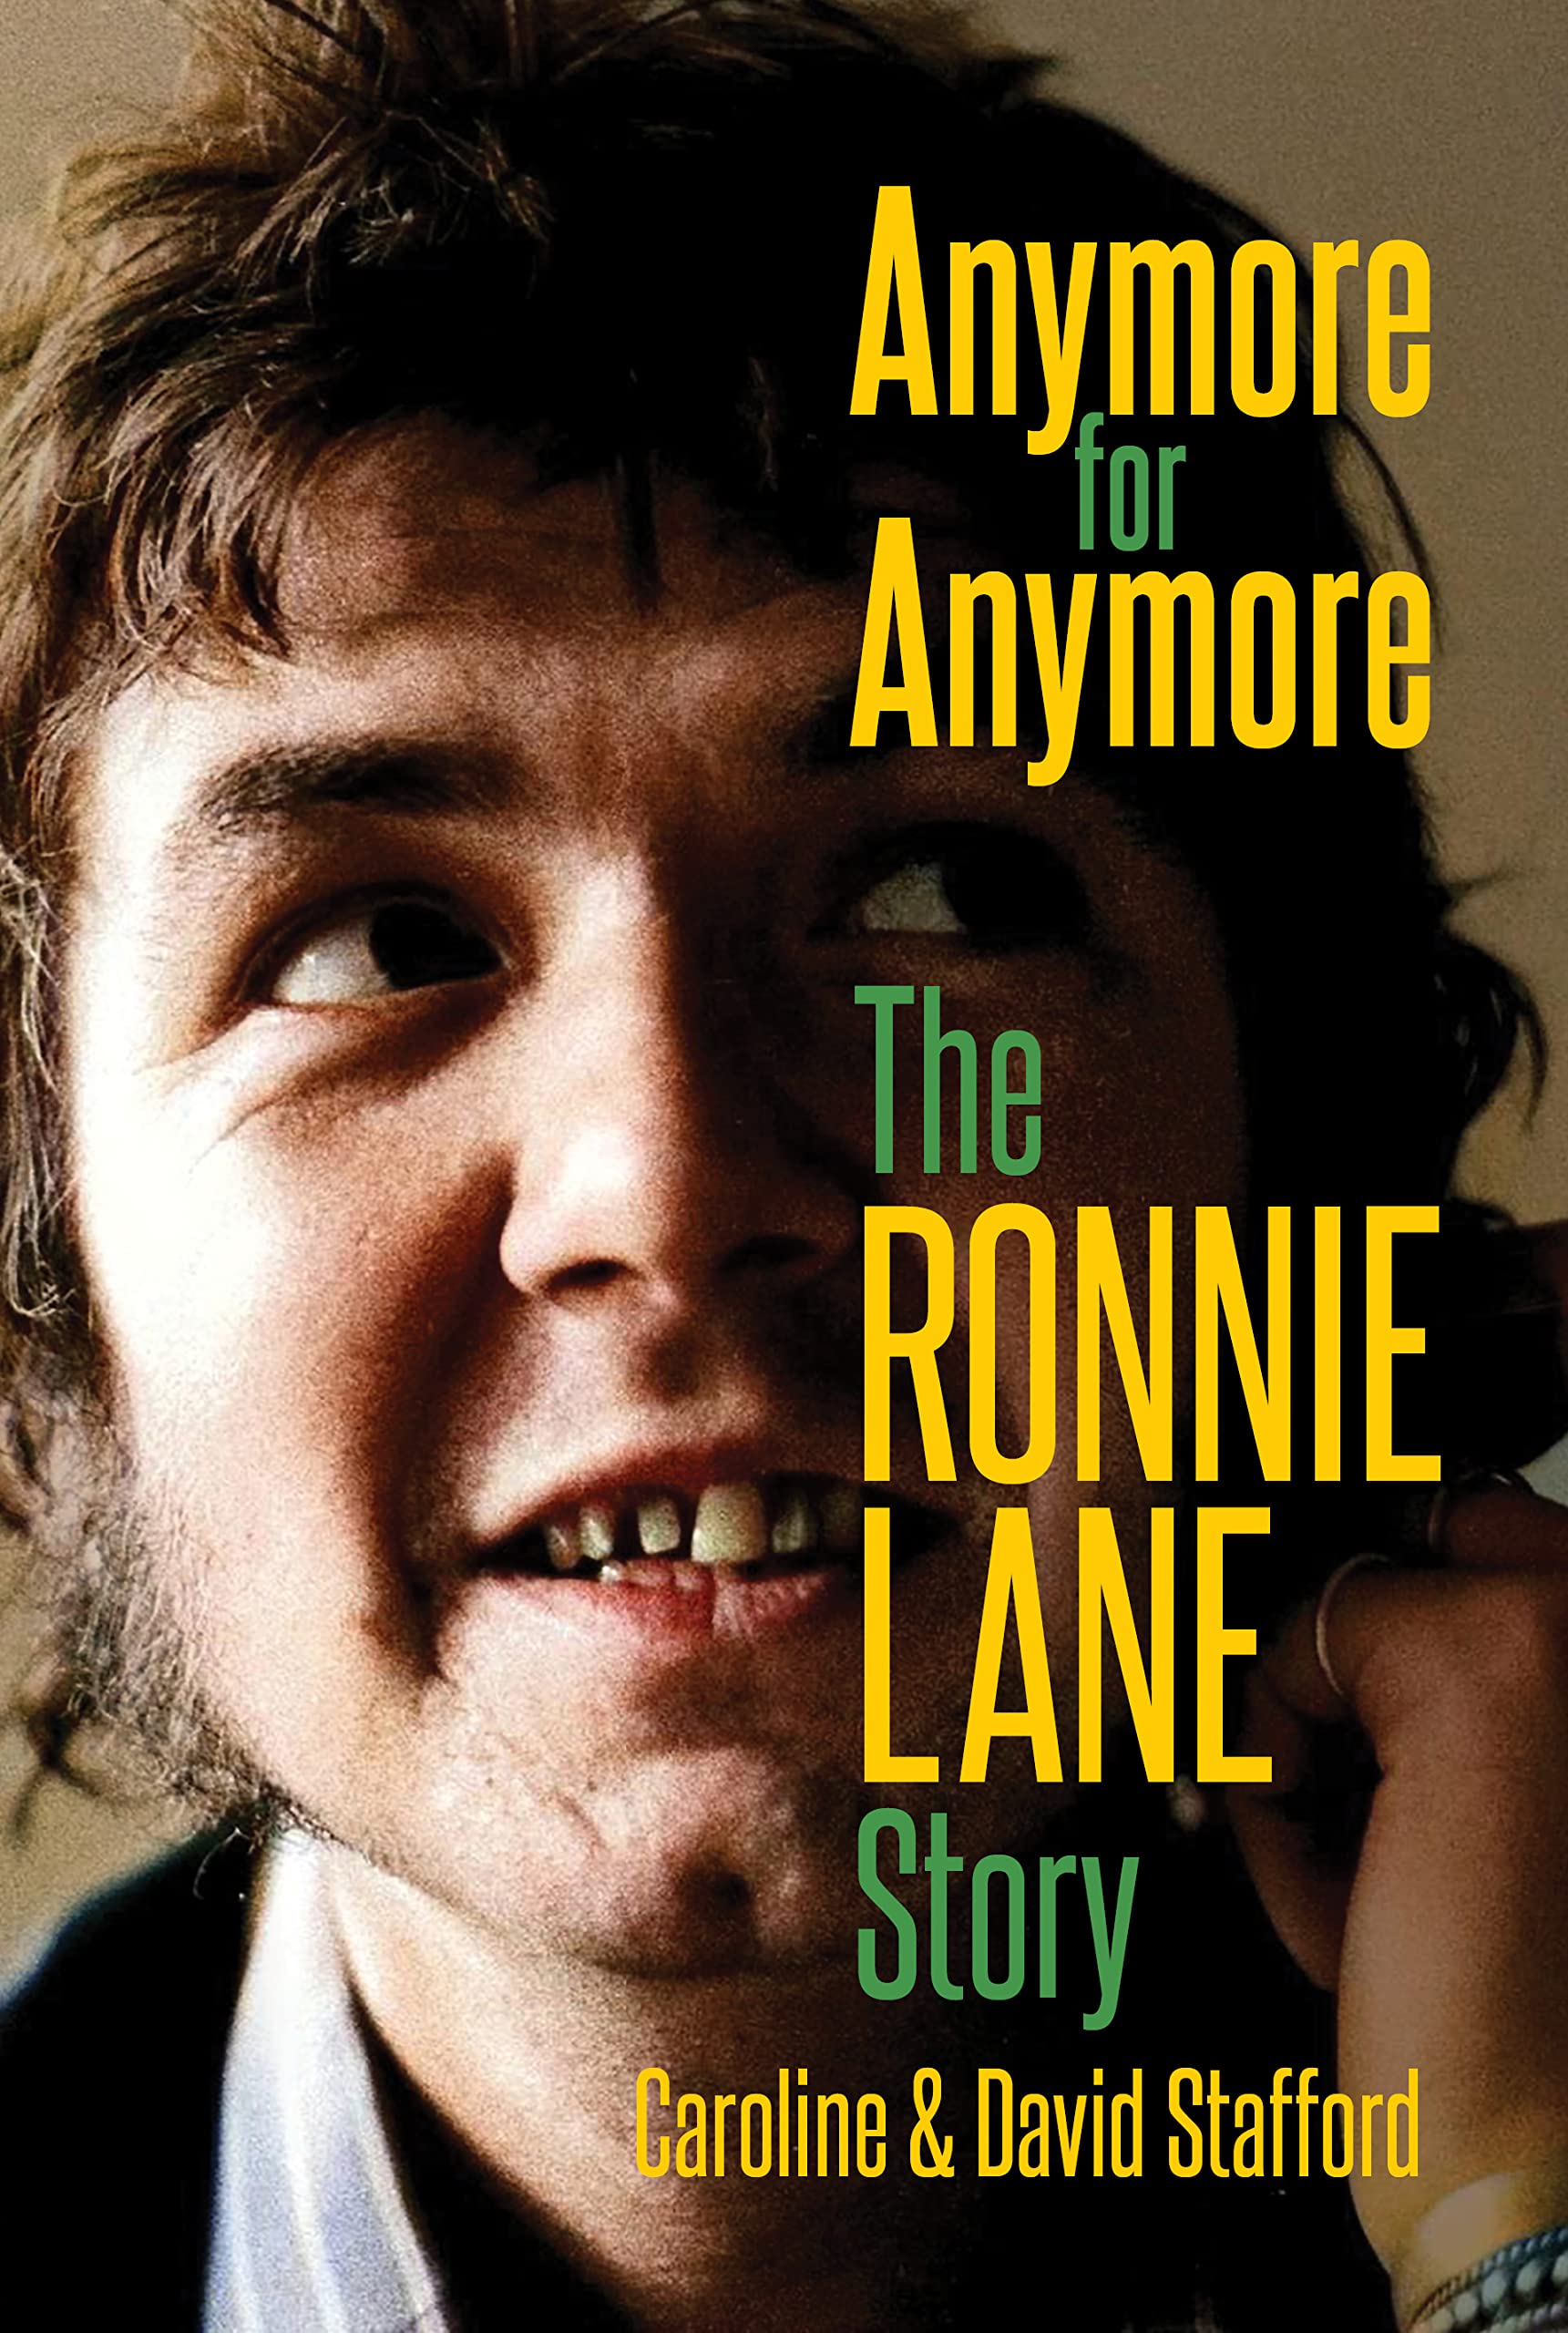 The_Ronnie_Lane_story_book_cover.